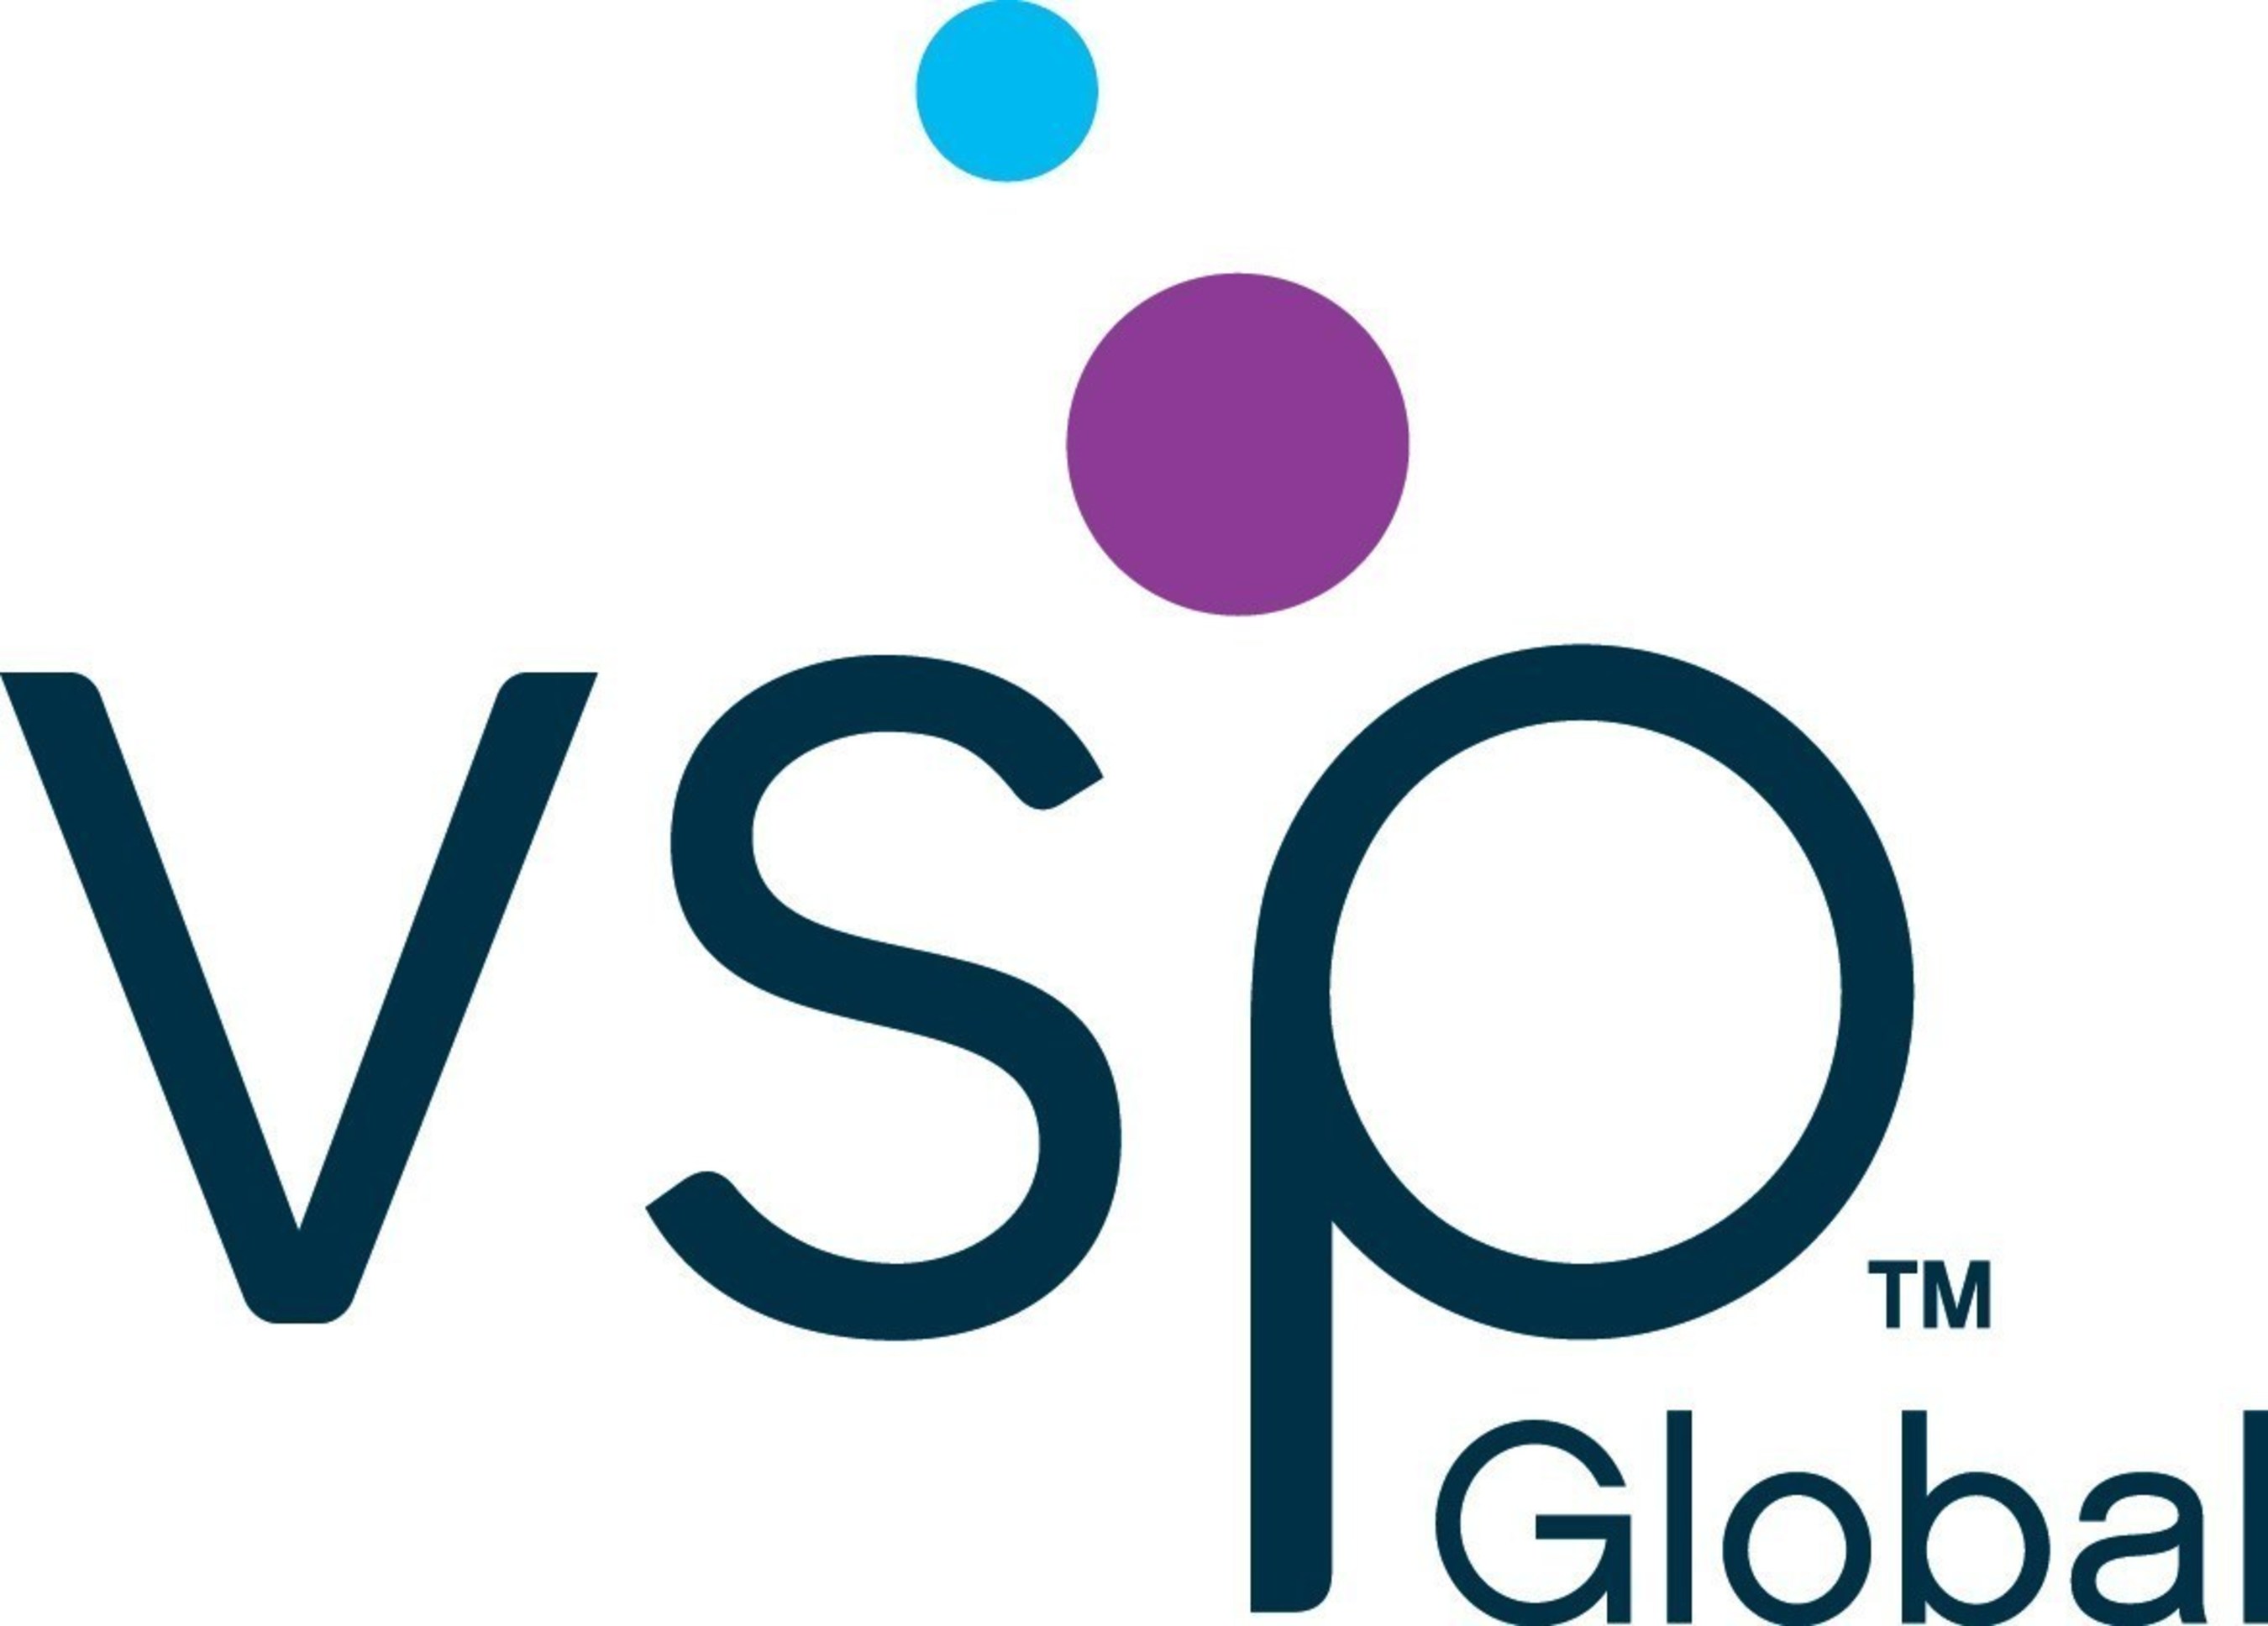 VSP Global(R) helps more than 80 million people see better by providing affordable, accessible, high-quality eye care and eyewear. Our complementary businesses combine superior eye care insurance, high-fashion frames, customized lenses, ophthalmic technology and retail solutions.